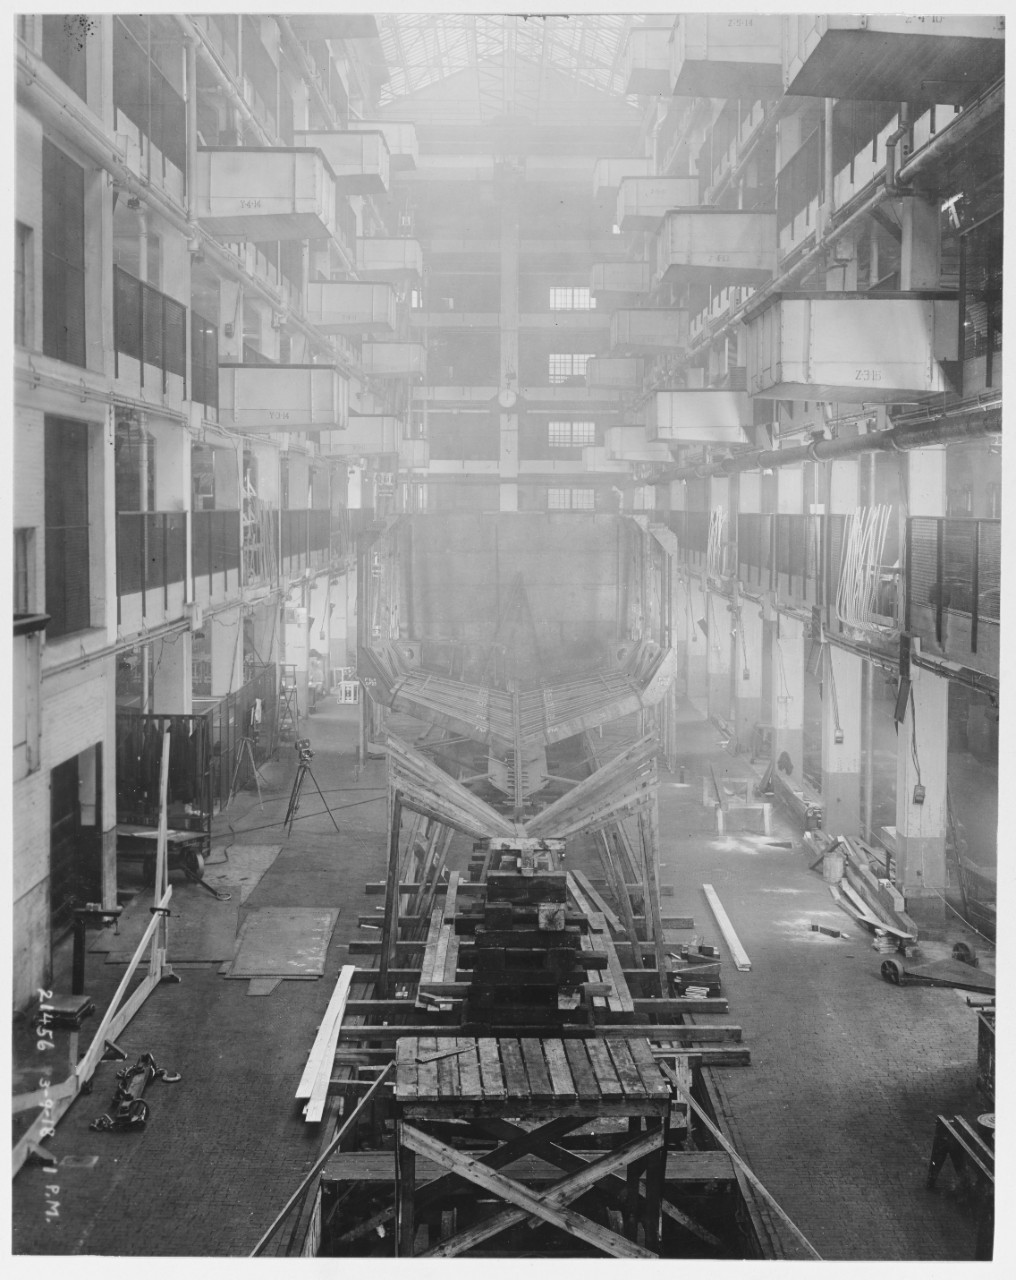 Construction of Ford Eagle Boats, Ford Motor Company, March 9, 1918